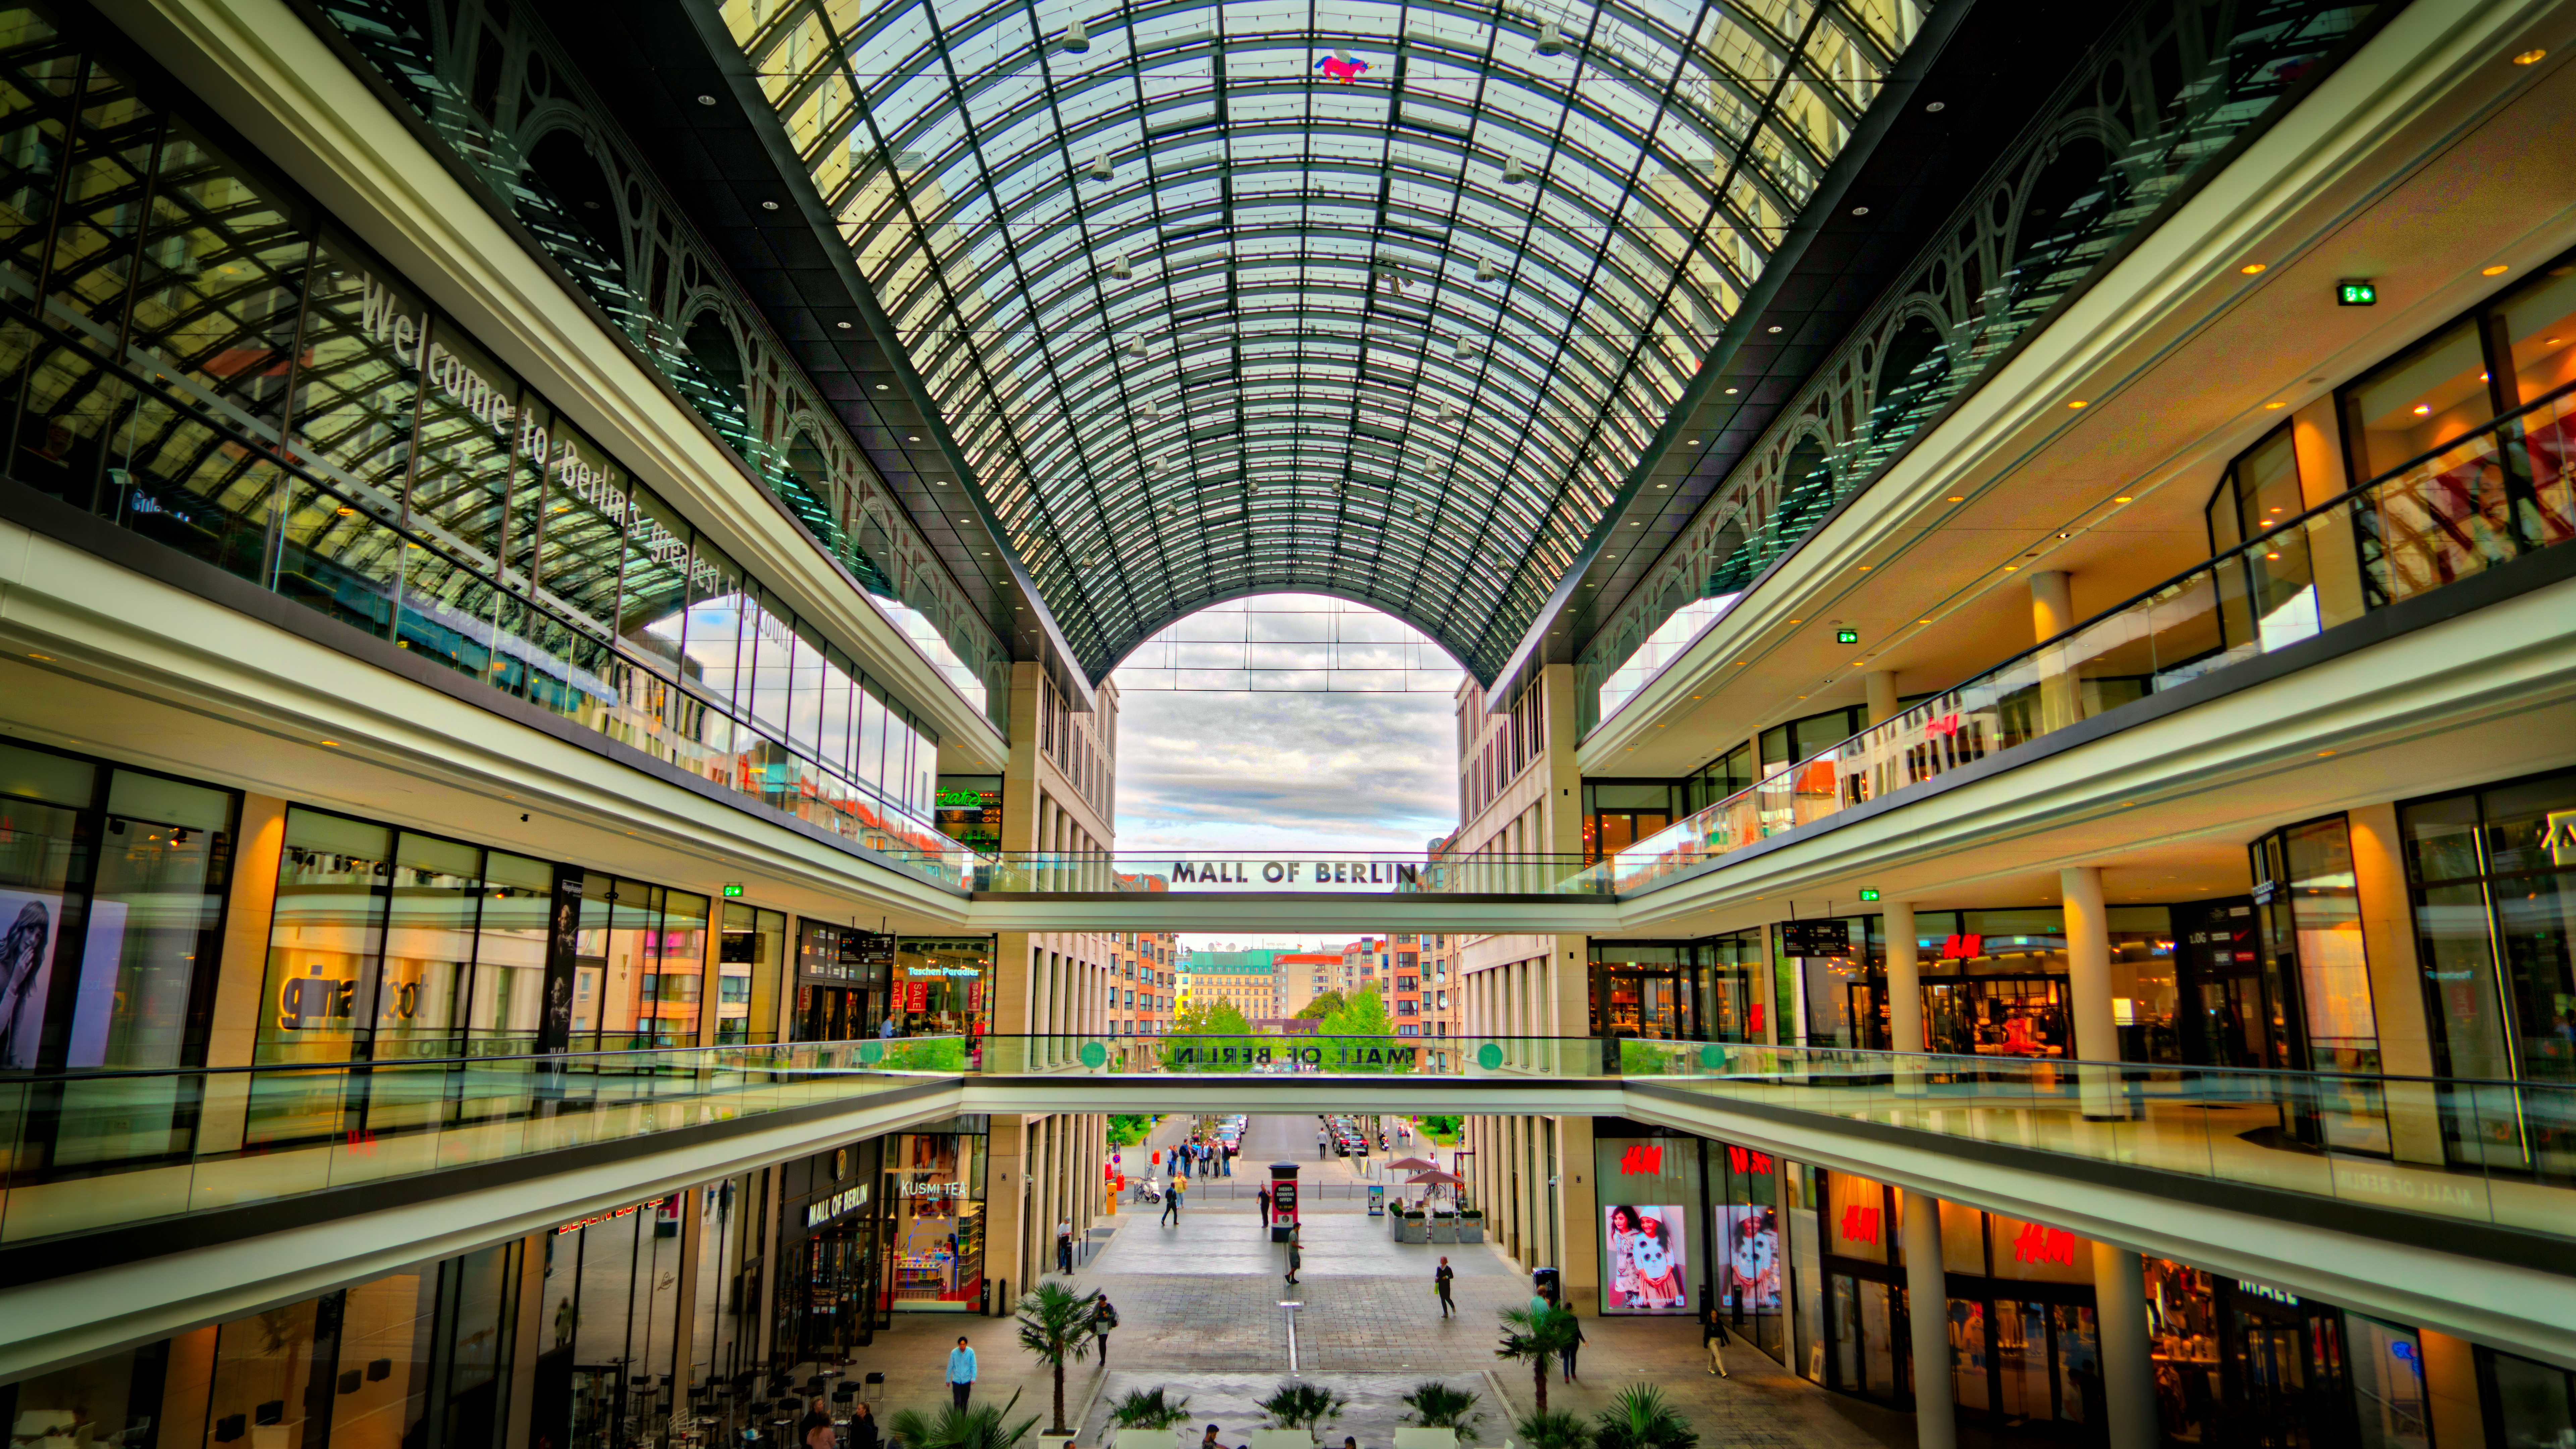 General 7680x4320 Trey Ratcliff photography Germany Berlin building MALL OF BERLIN